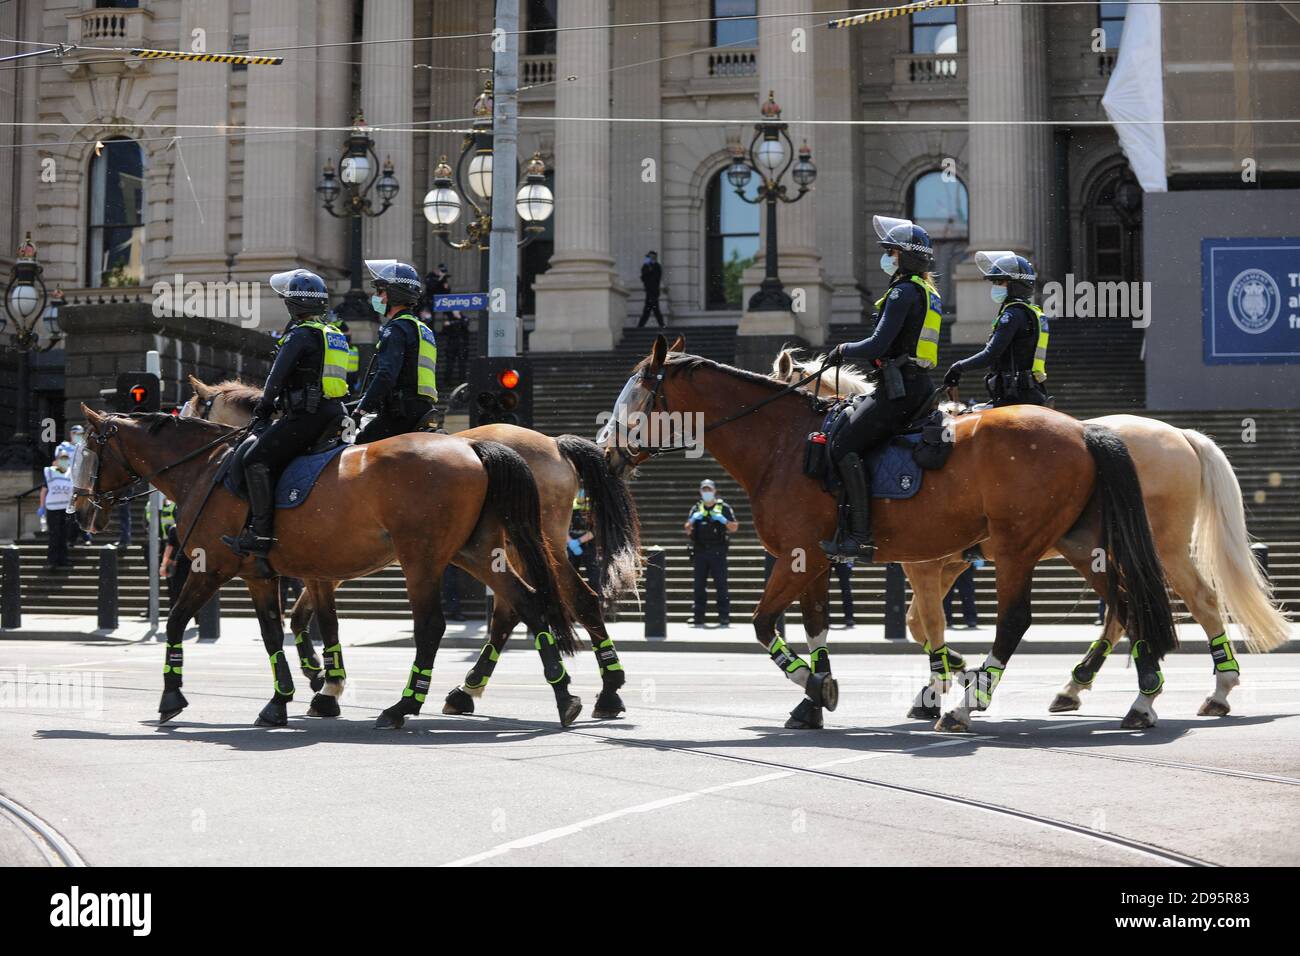 Melbourne, Australia 03 Nov 2020, police horses move along Spring Street to get into position for an expected protest in front the state parliament for another Freedom Day demonstration on Melbourne Cup Day demanding the sacking of Premier Daniel Andrews over lockdown laws. Credit: Michael Currie/Alamy Live News Stock Photo